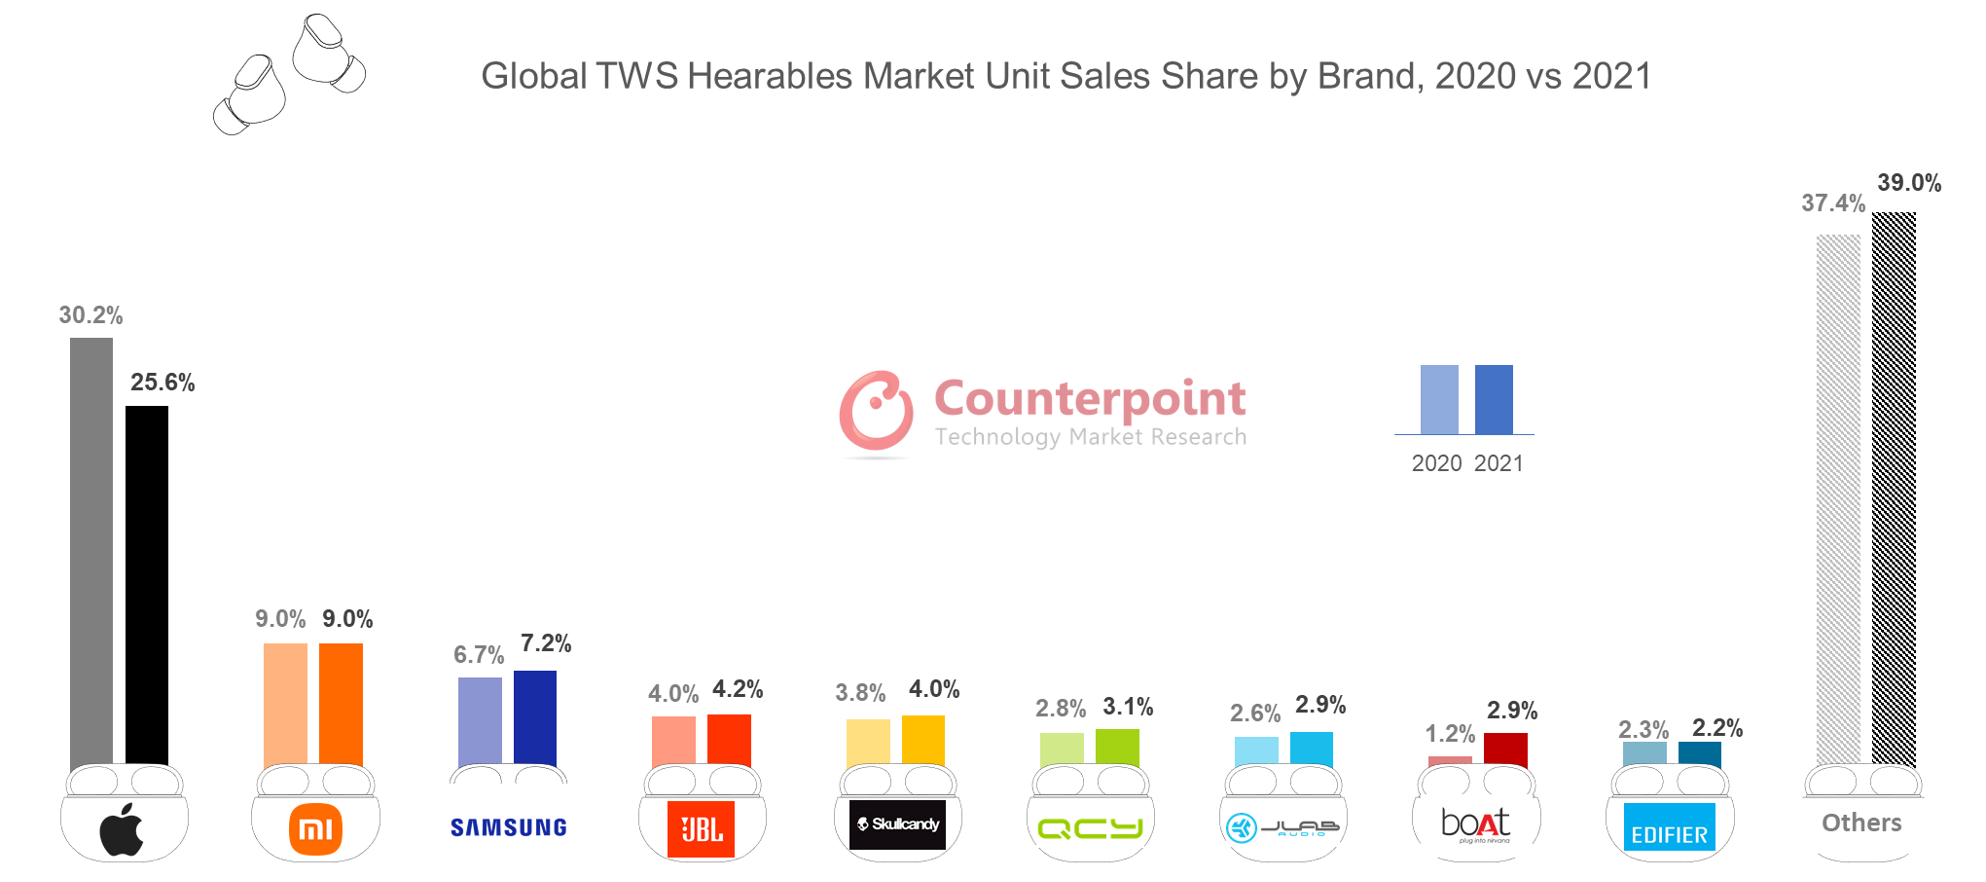 Counterpoint Research Global TWS Hearables Market Unit Sales Share by Brand, 2020 vs 2021